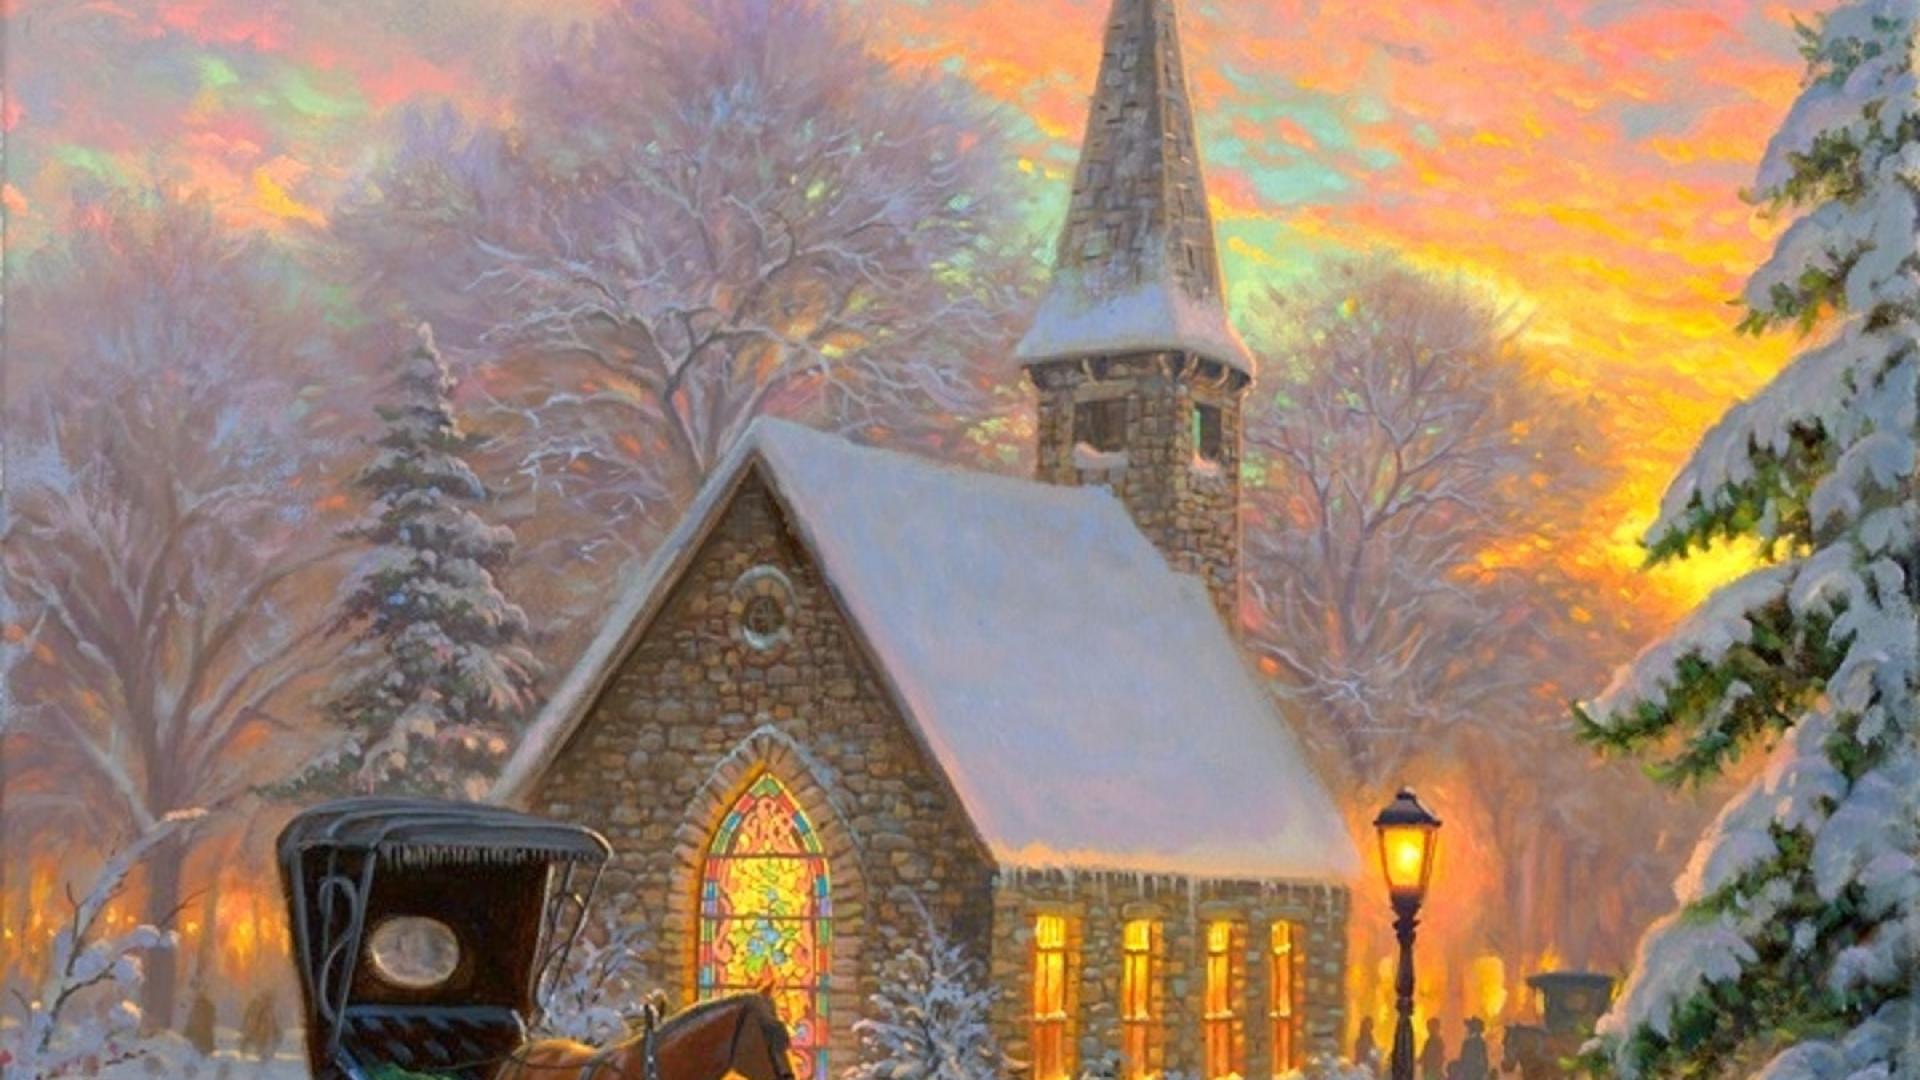 Artistic Carriage Chapel Church Horse Religious Steeple 1920x1080